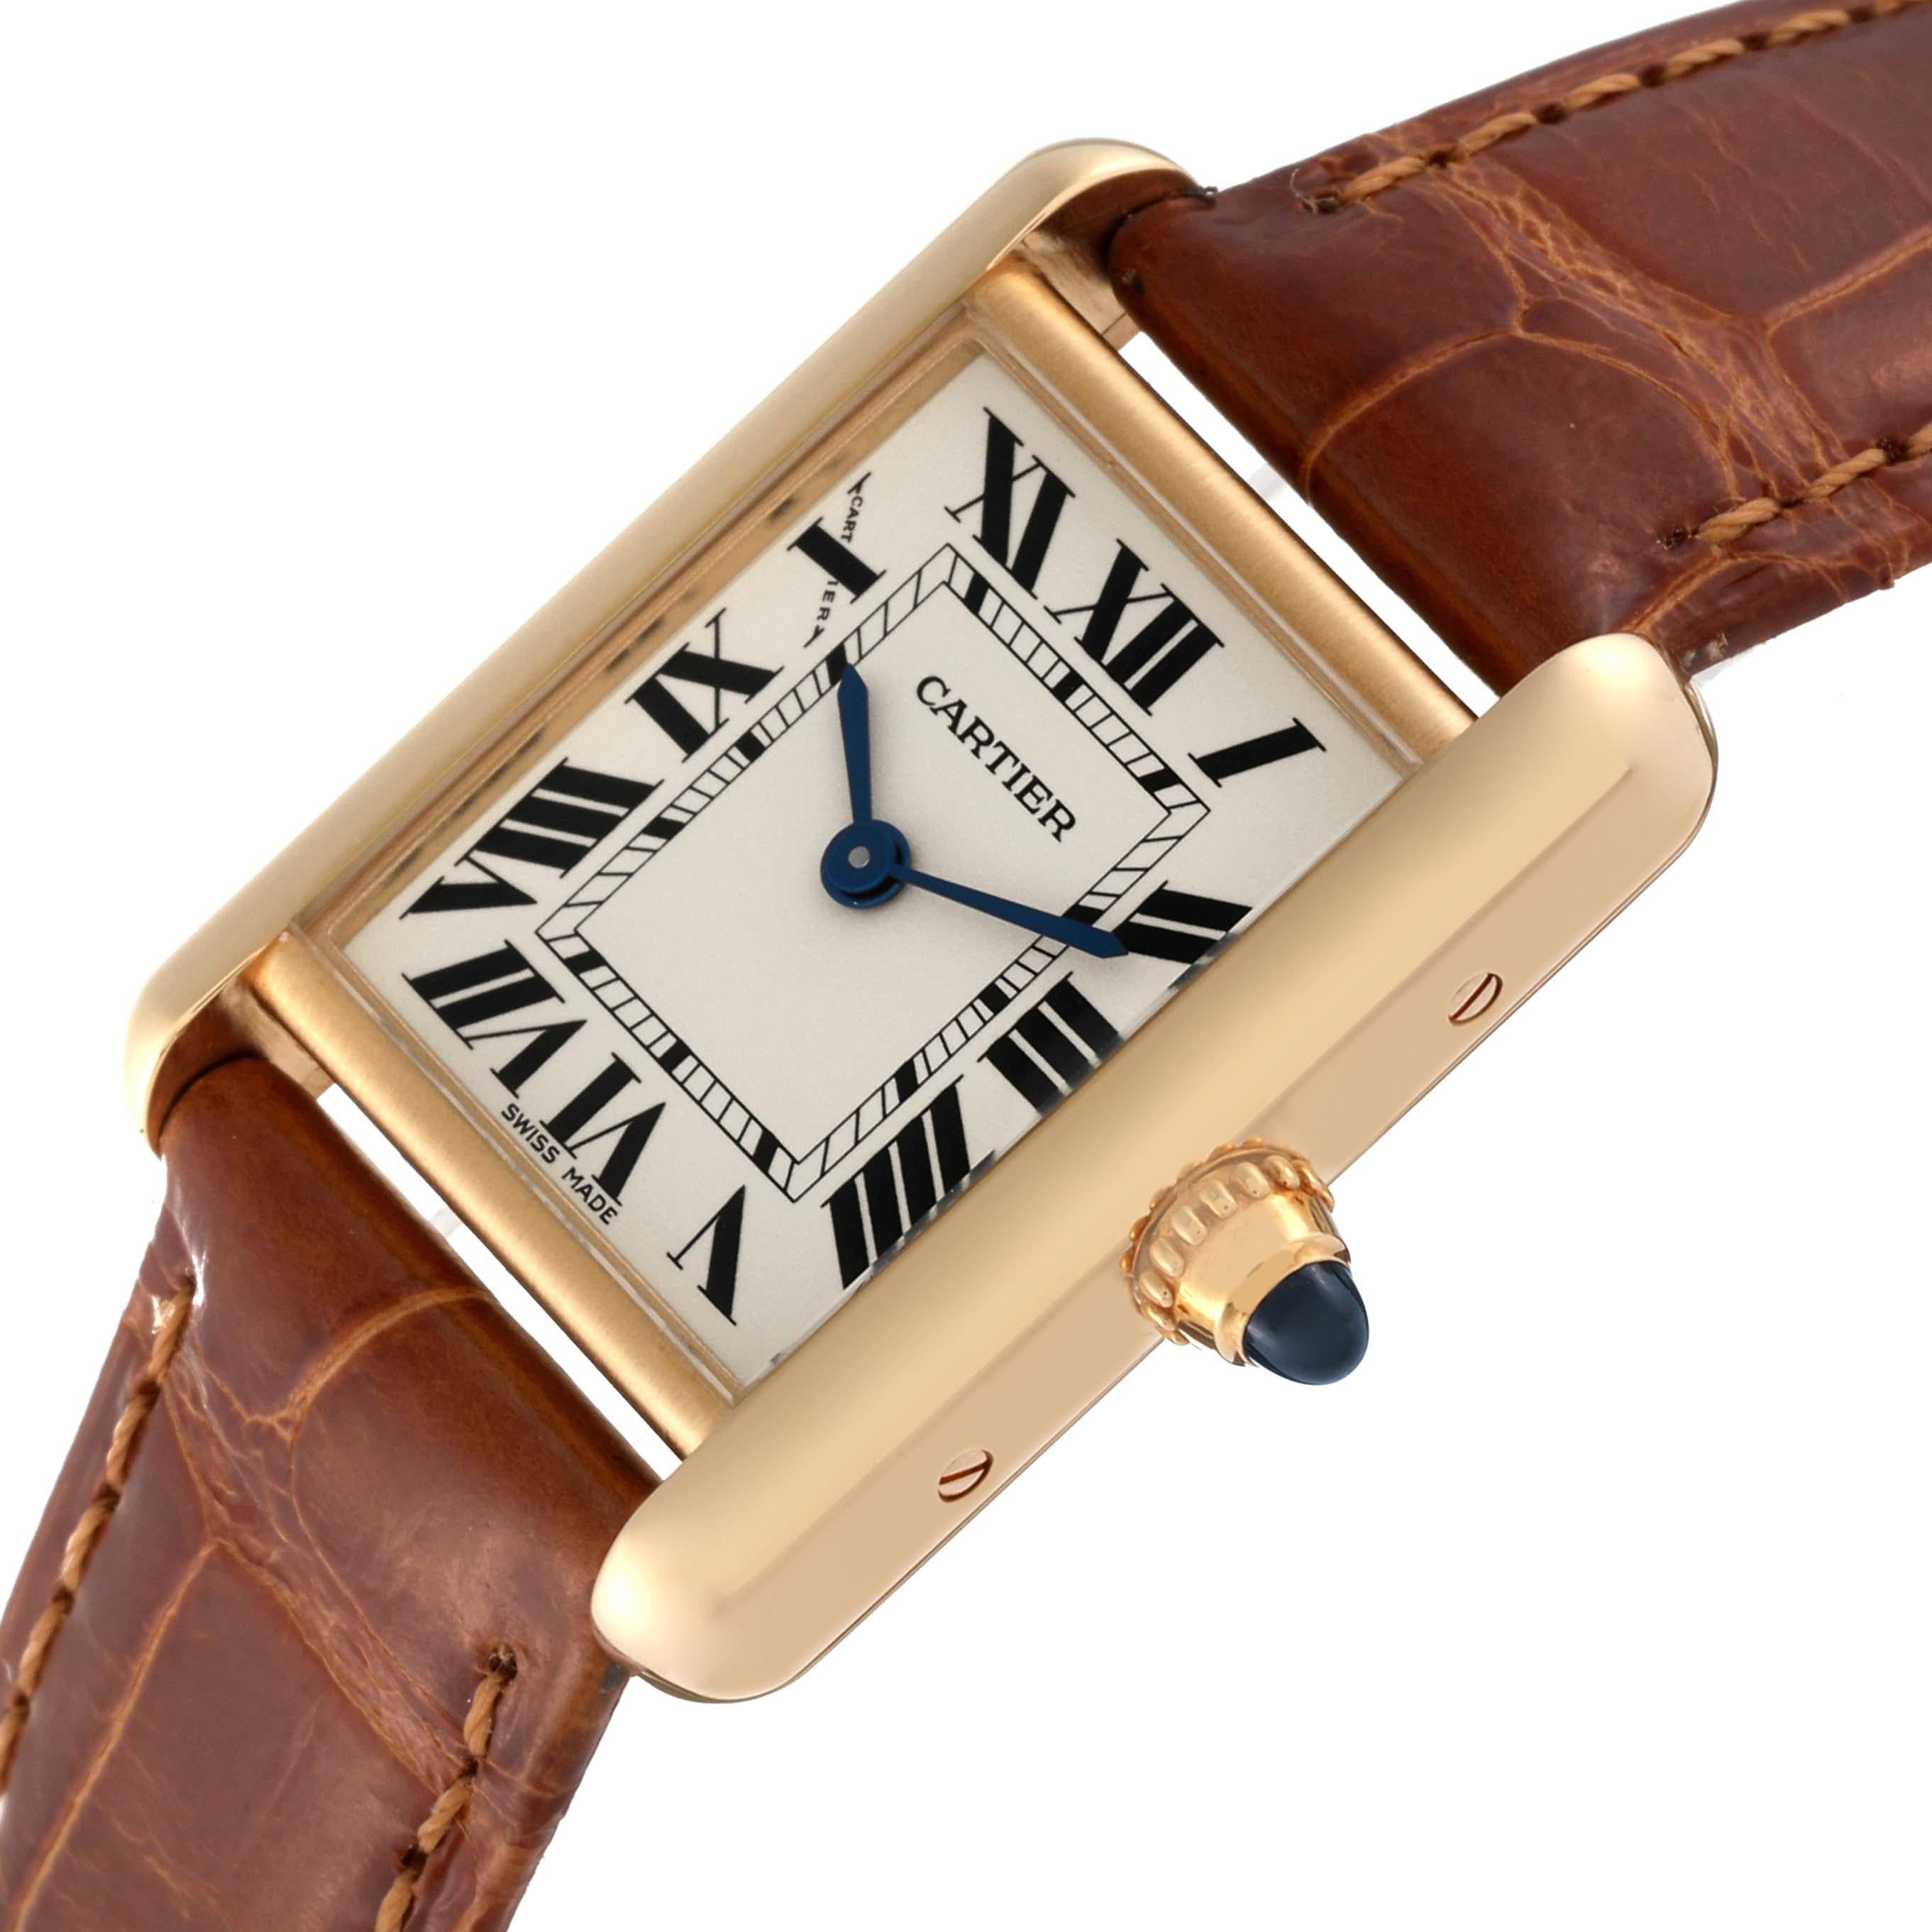 Cartier Tank Louis Small Yellow Gold Brown Strap Ladies Watch W1529856 Papers 1